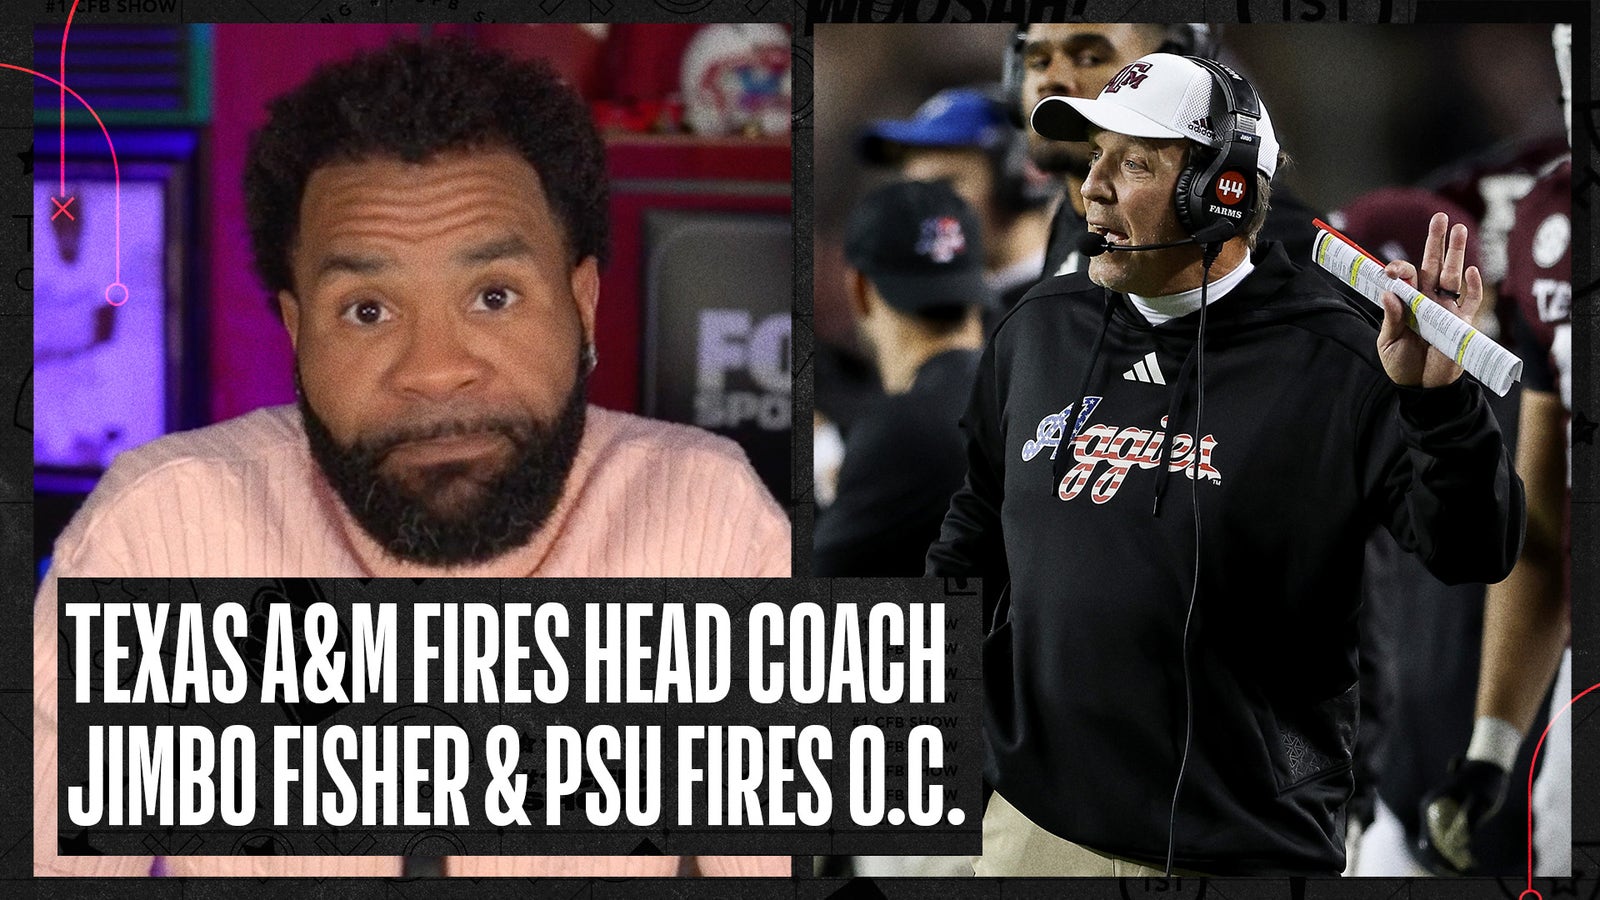 Texas A&M fires Jimbo Fisher, Penn State fires Mike Yurcich